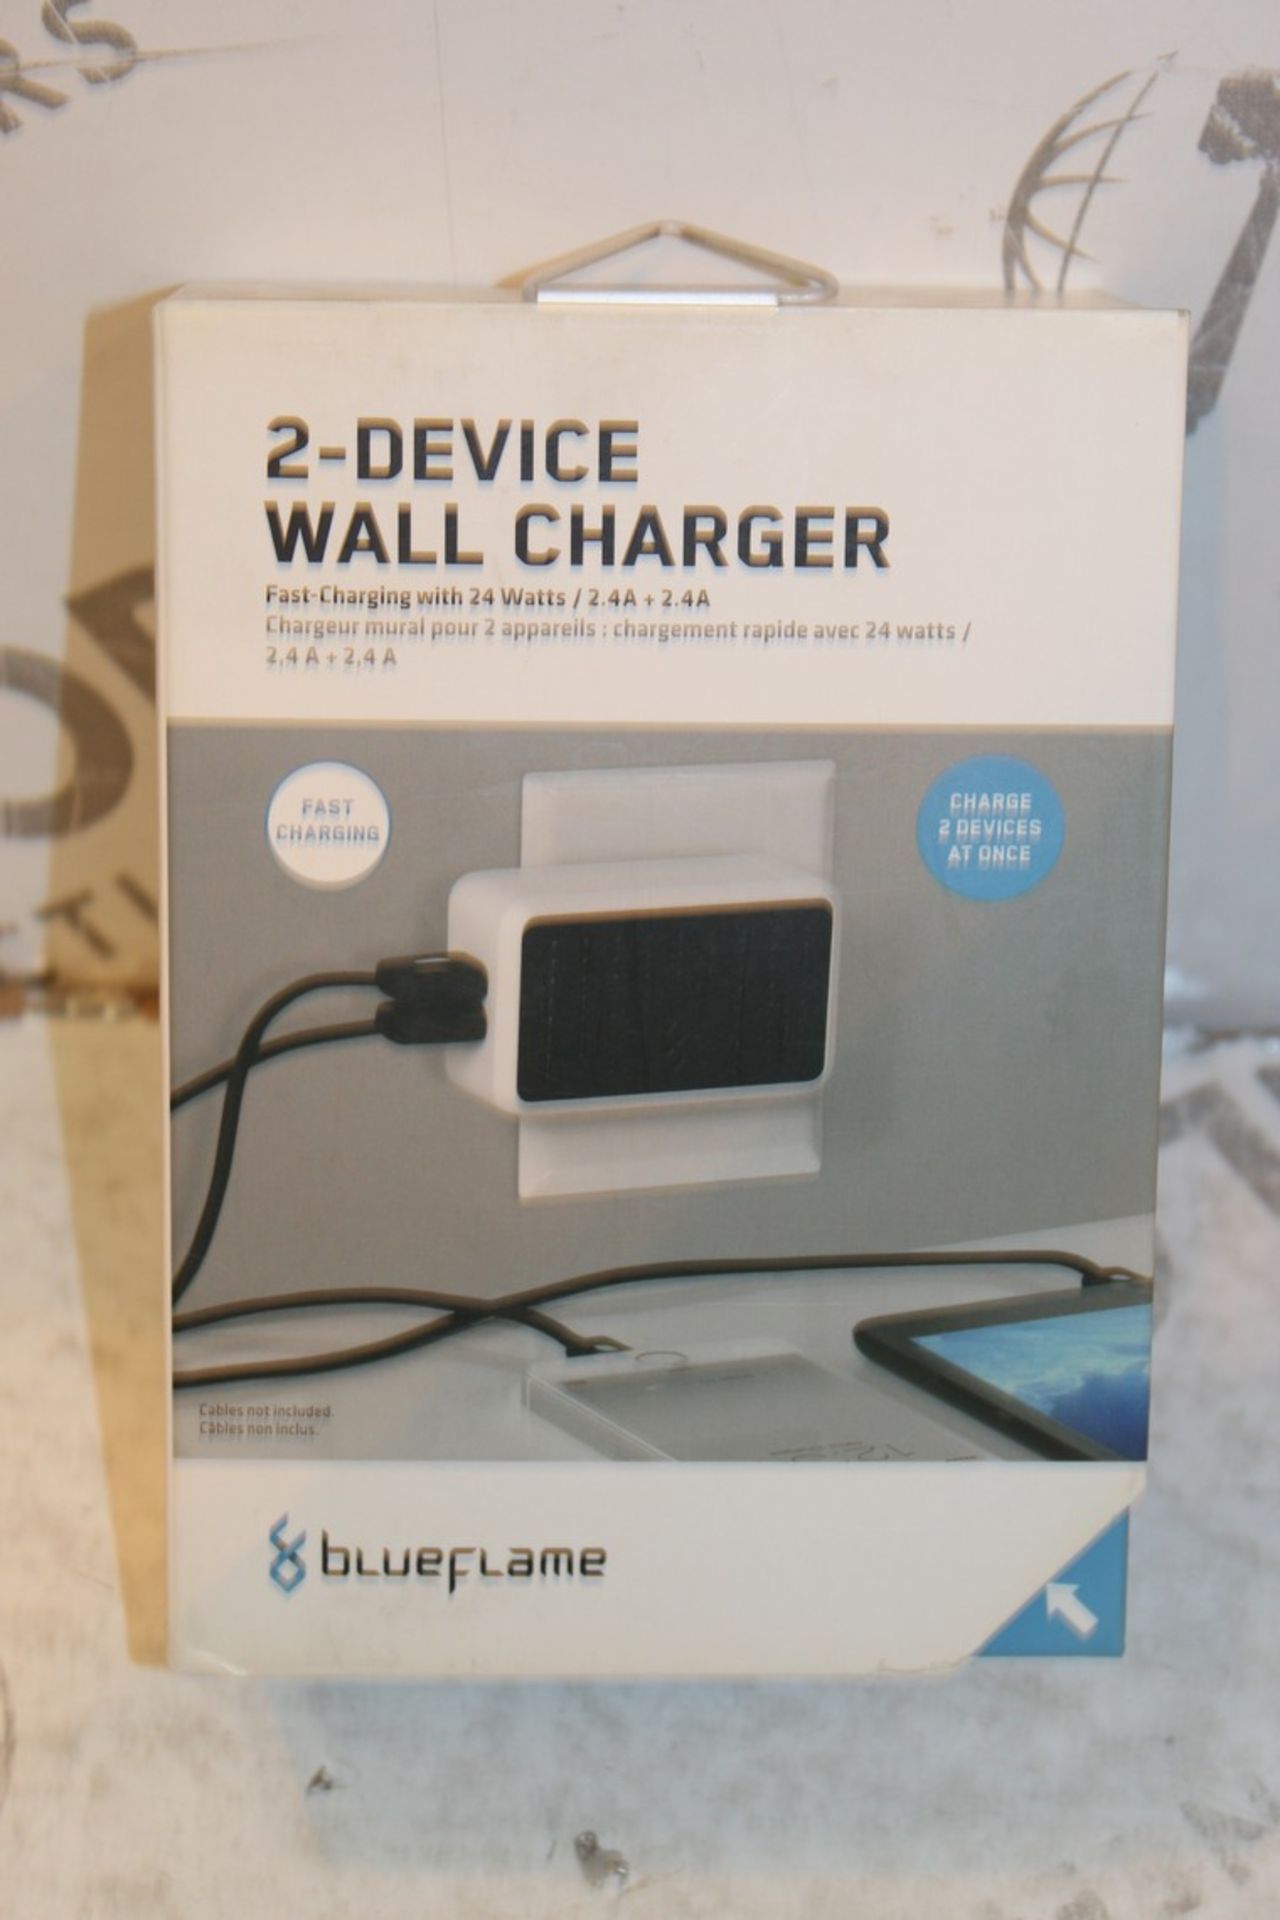 Boxed Brand New Blue Flame 2 Device Wall Charger RRP £35 (Appraisals Available Upon Request) (